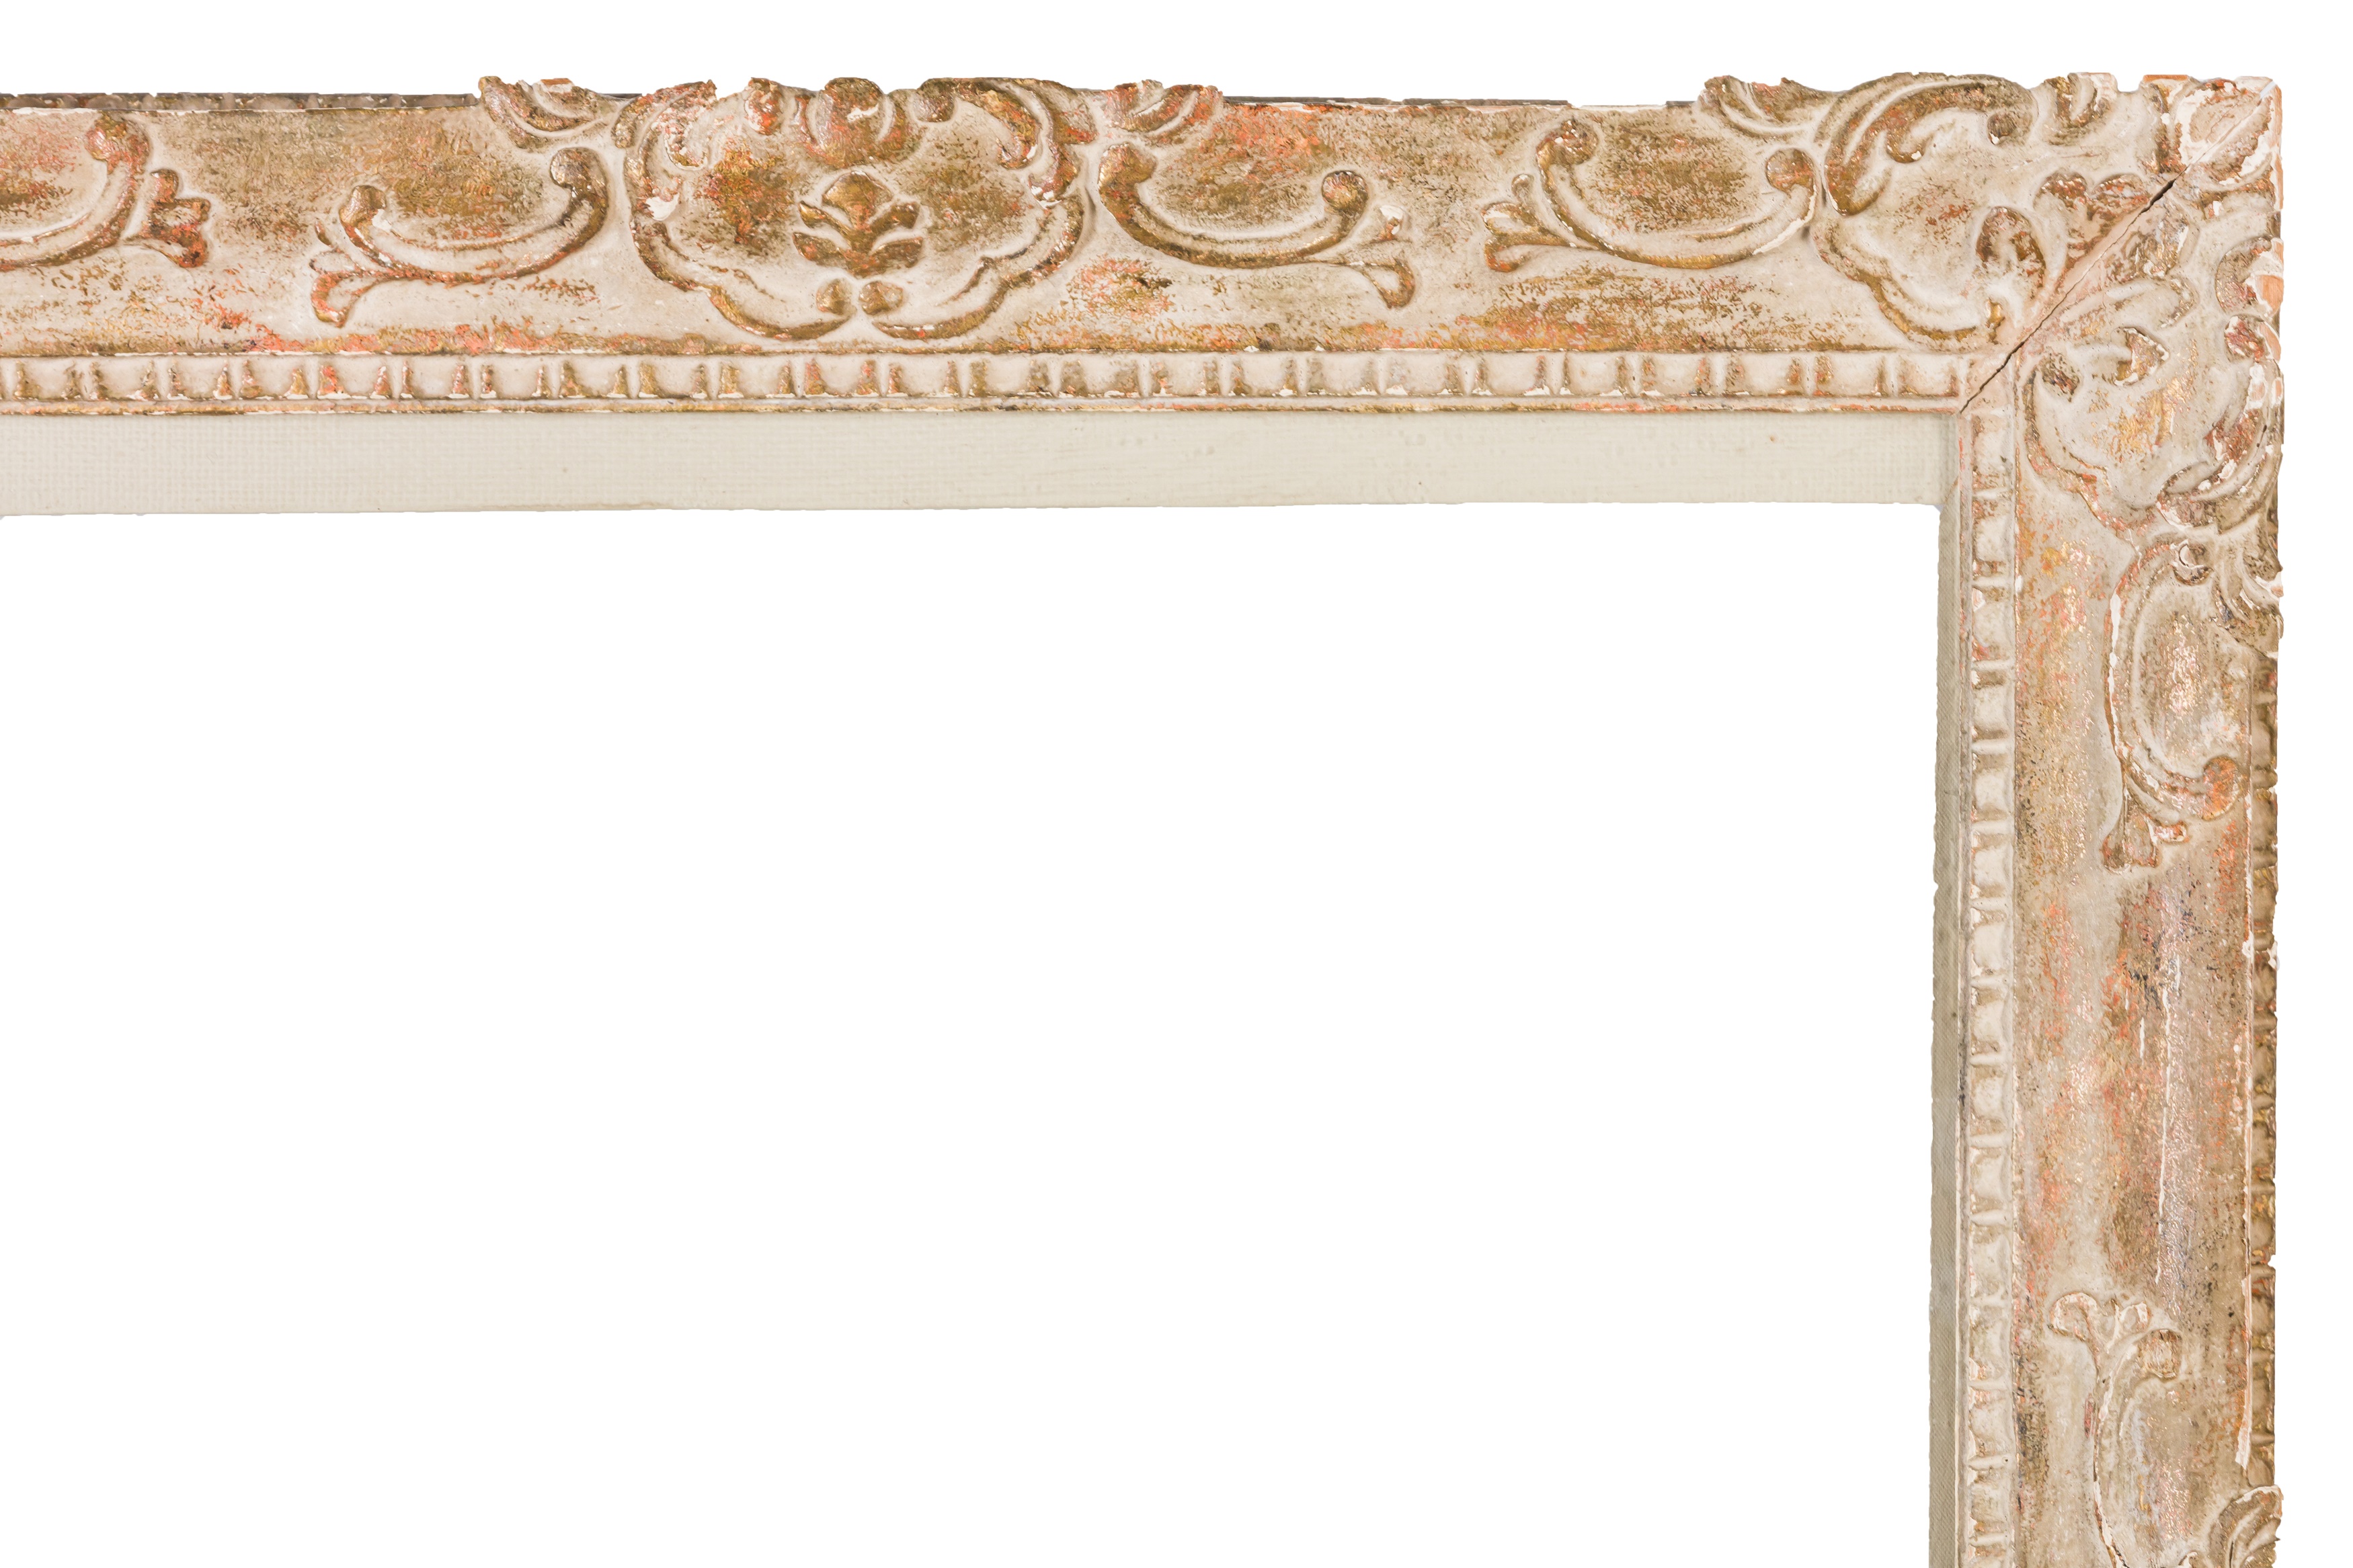 A LOUIS XIV STYLE CARVED AND GILDED FRAME With dentil sight, taenia, plain frieze, leaf cartouche - Image 2 of 4